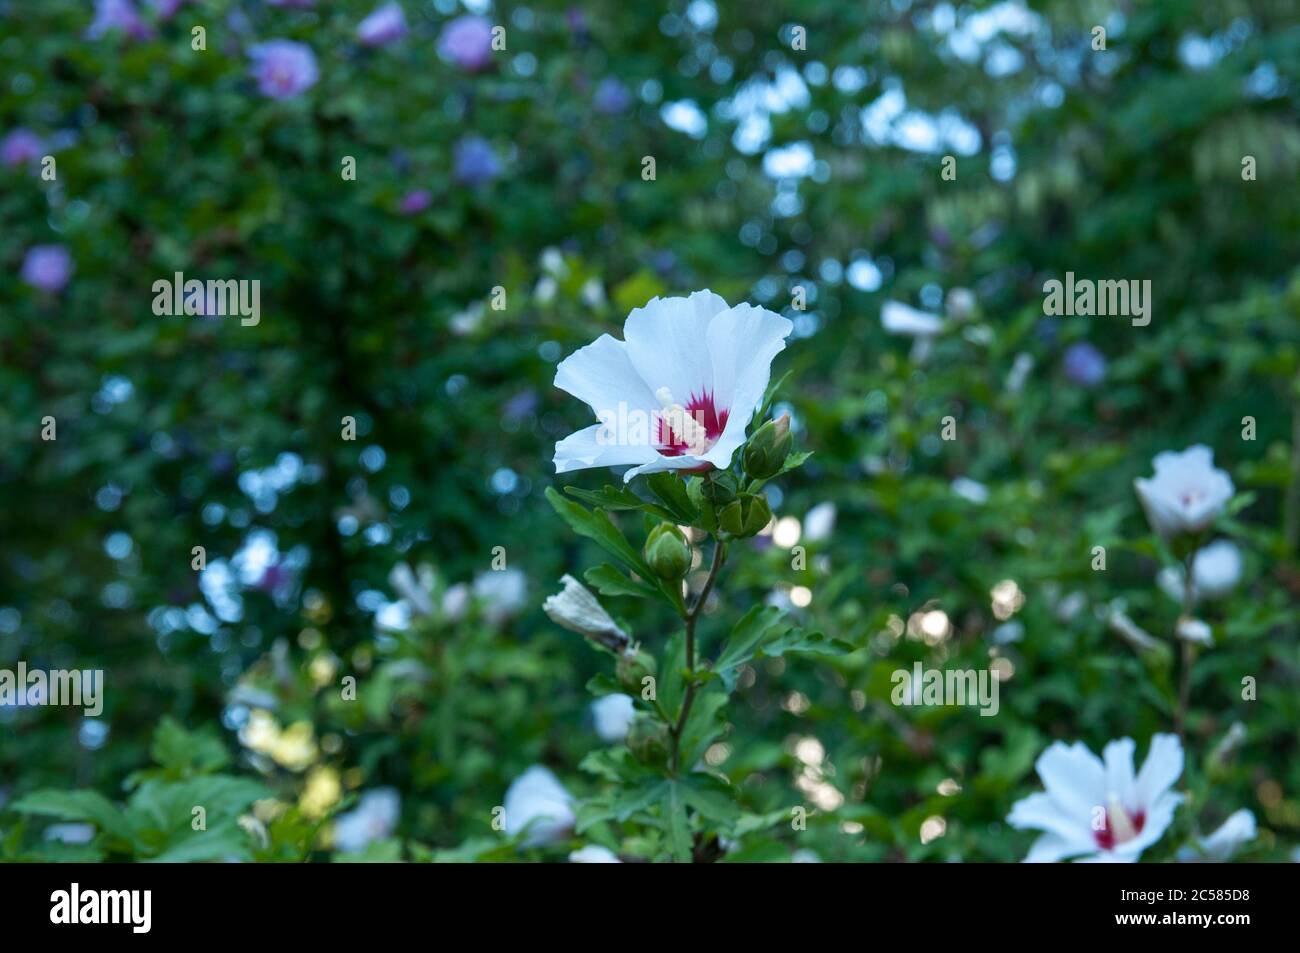 Hibiscus Syrian or Chinese rose, flowers of the Malvaceae family. The family Malvaceae. Flowering Bush with hibiscus flowers. Stock Photo